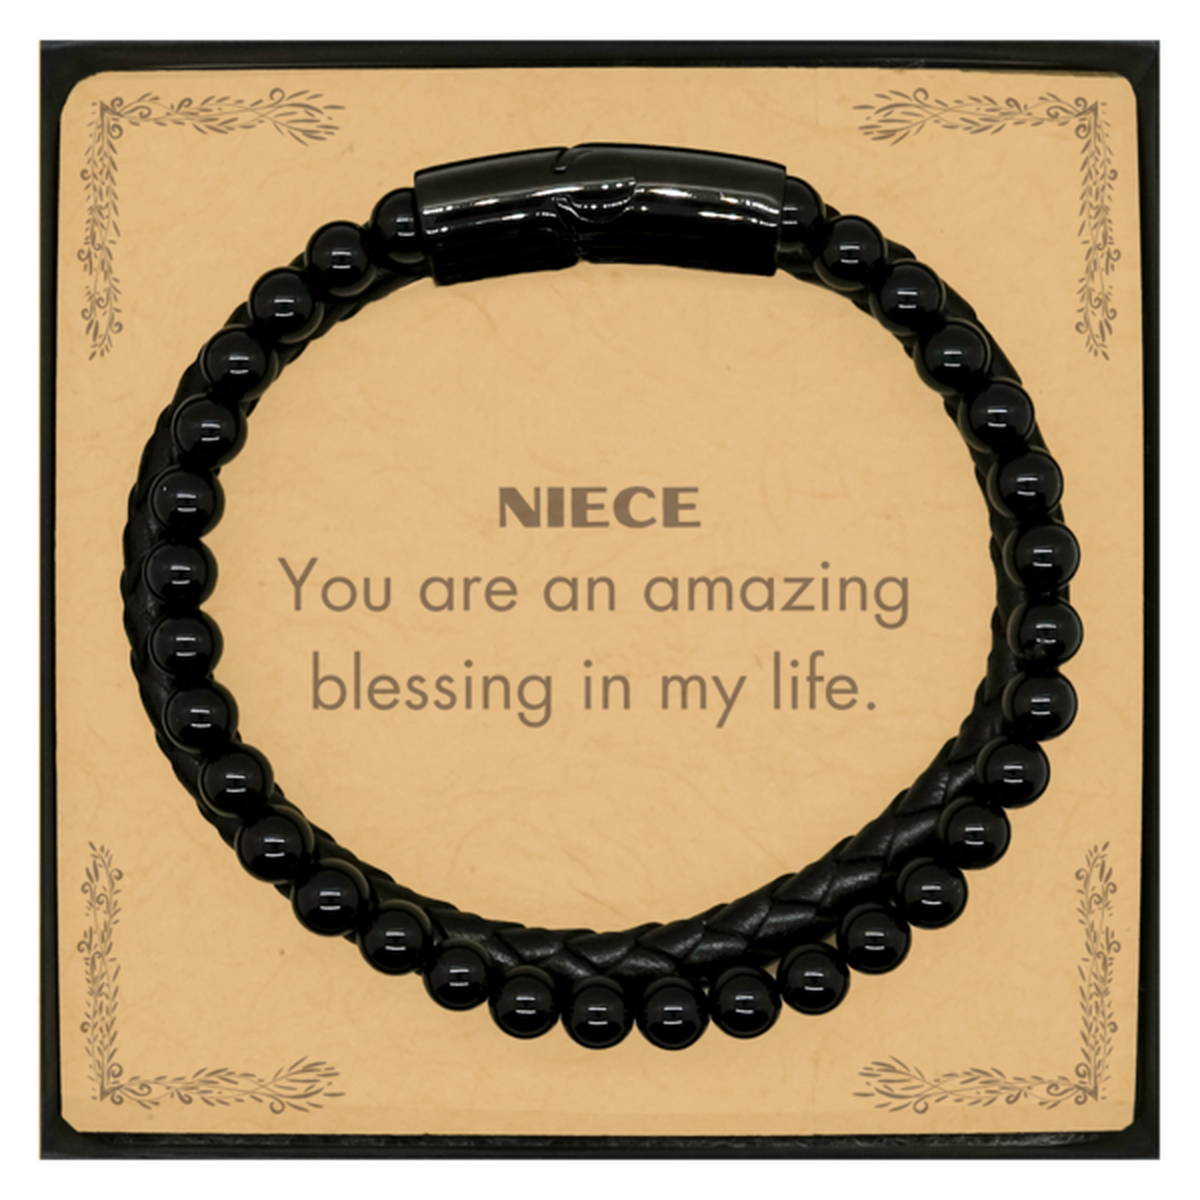 Niece Stone Leather Bracelets, You are an amazing blessing in my life, Thank You Gifts For Niece, Inspirational Birthday Christmas Unique Gifts For Niece